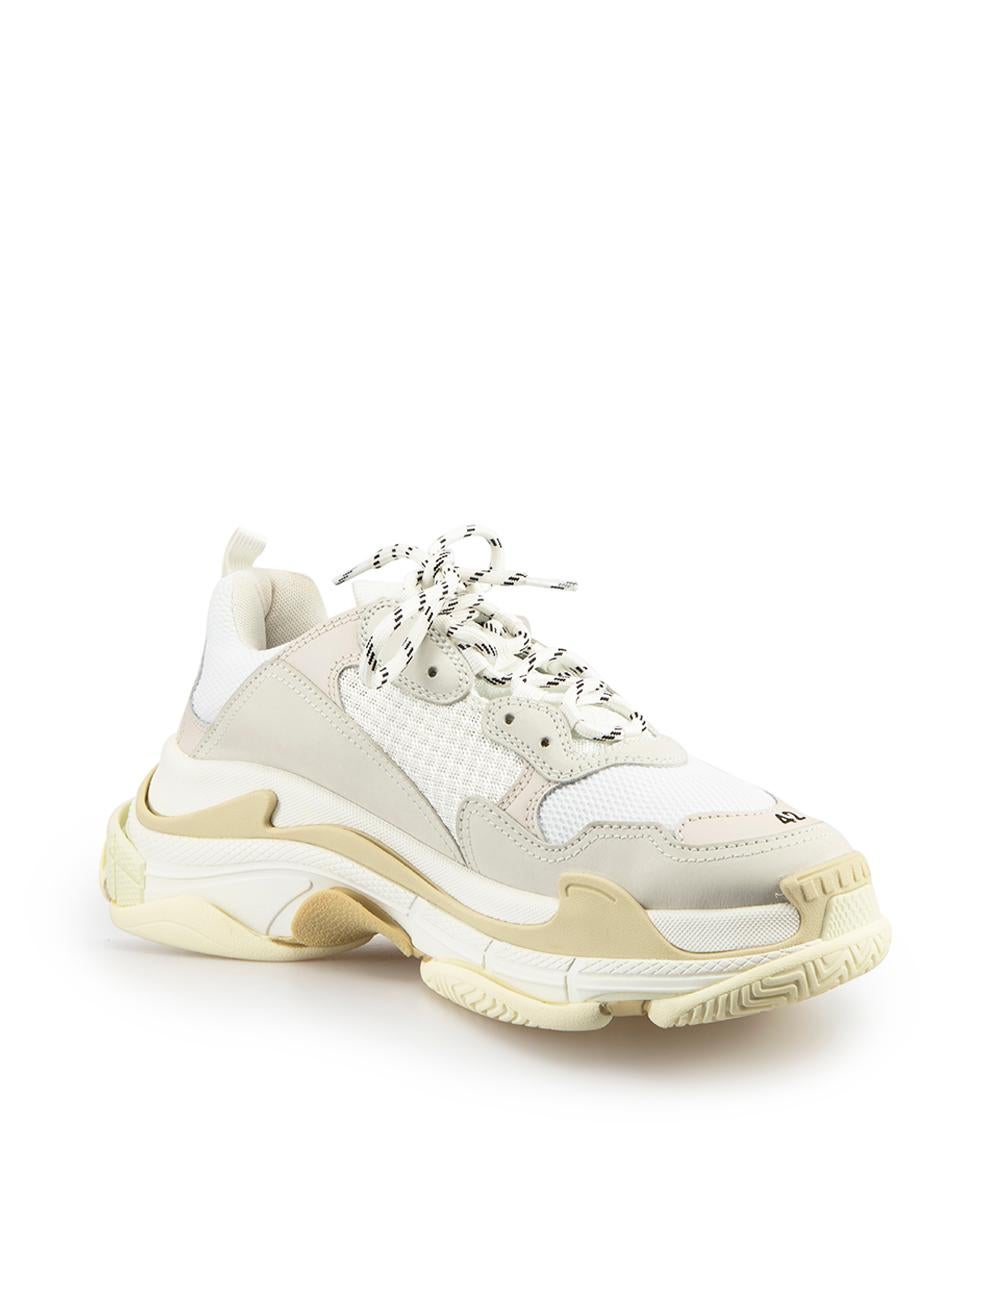 CONDITION is Never worn, with tags. No visible wear to trainers is evident on this new Balenciaga designer resale item. Original box and dustbag included.
 
 Details
  Unisex
 White, grey and beige
 Mesh and leather
 Low top trainers
 Chunky heel